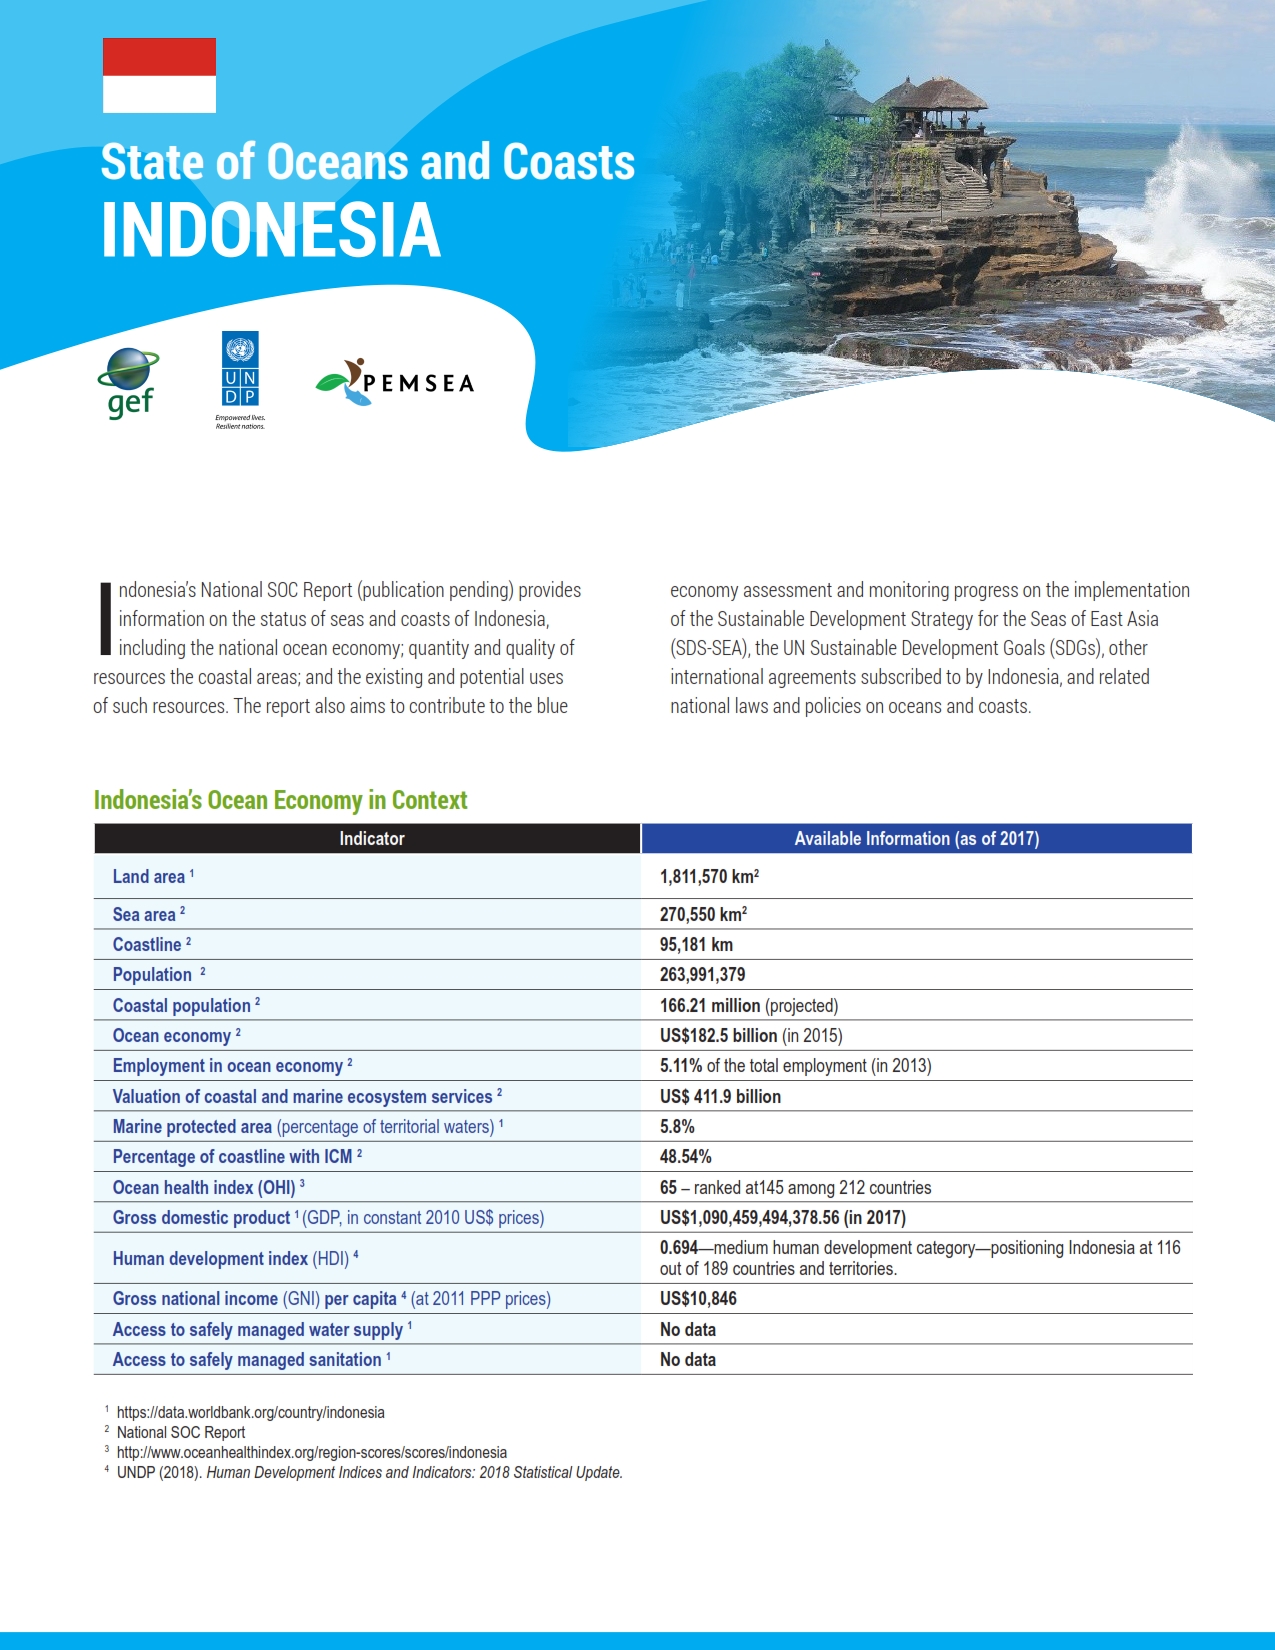 State of Oceans and Coasts of Indonesia